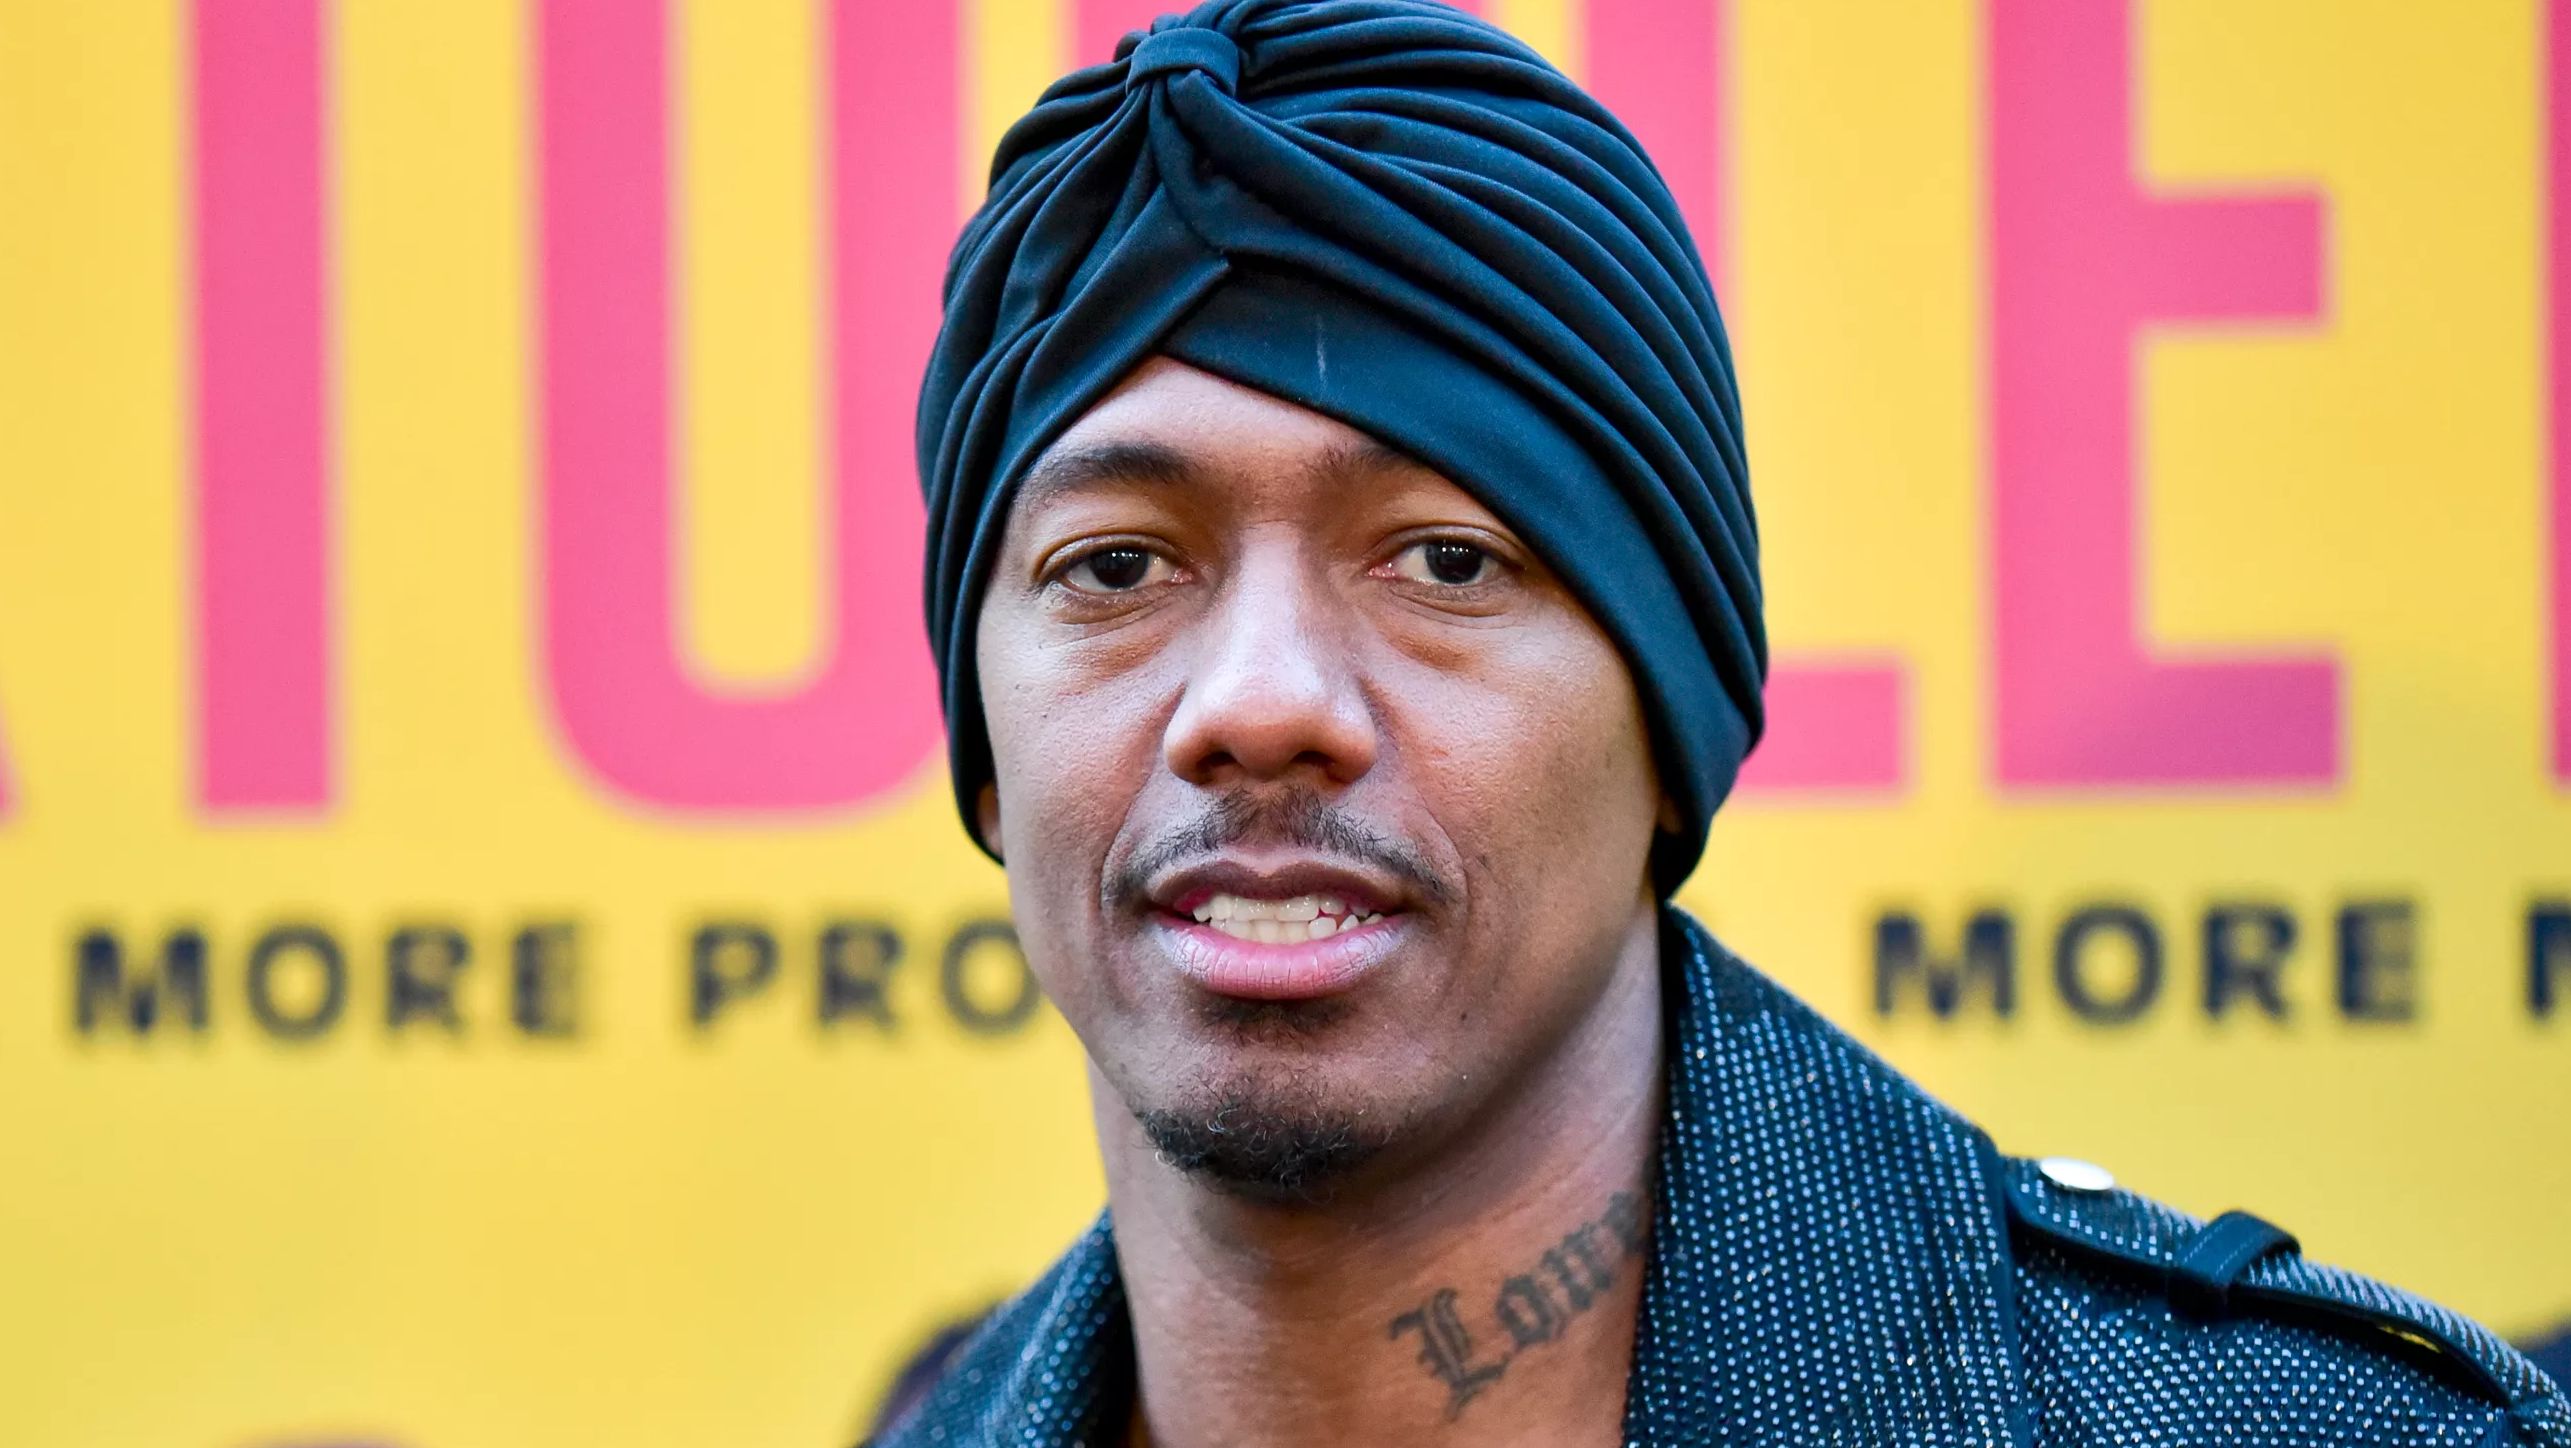 Nick Cannon has been cancelled for  referring to whites as “savages”